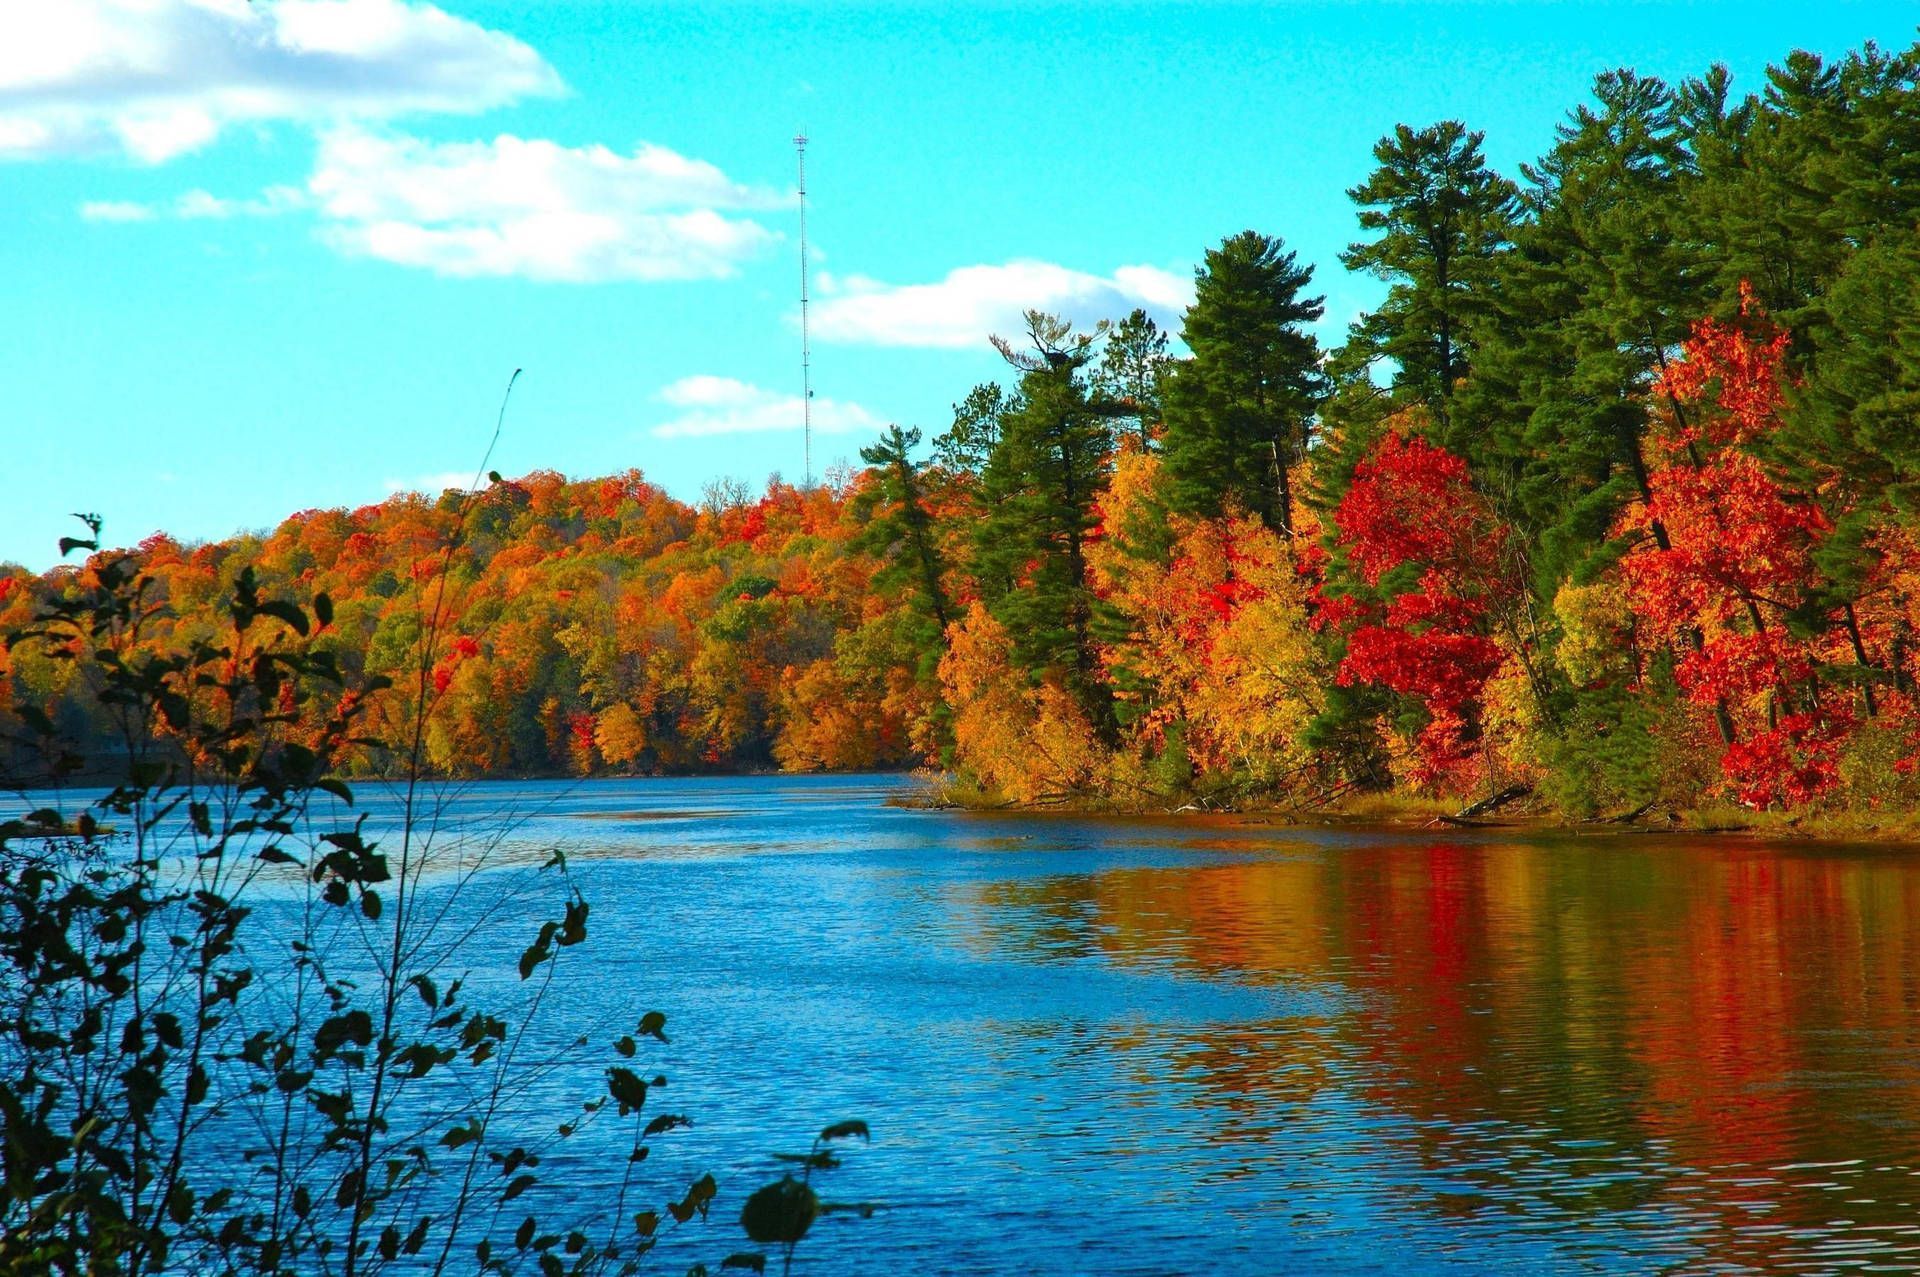 A river with trees on the bank covered in fall foliage. - Lake